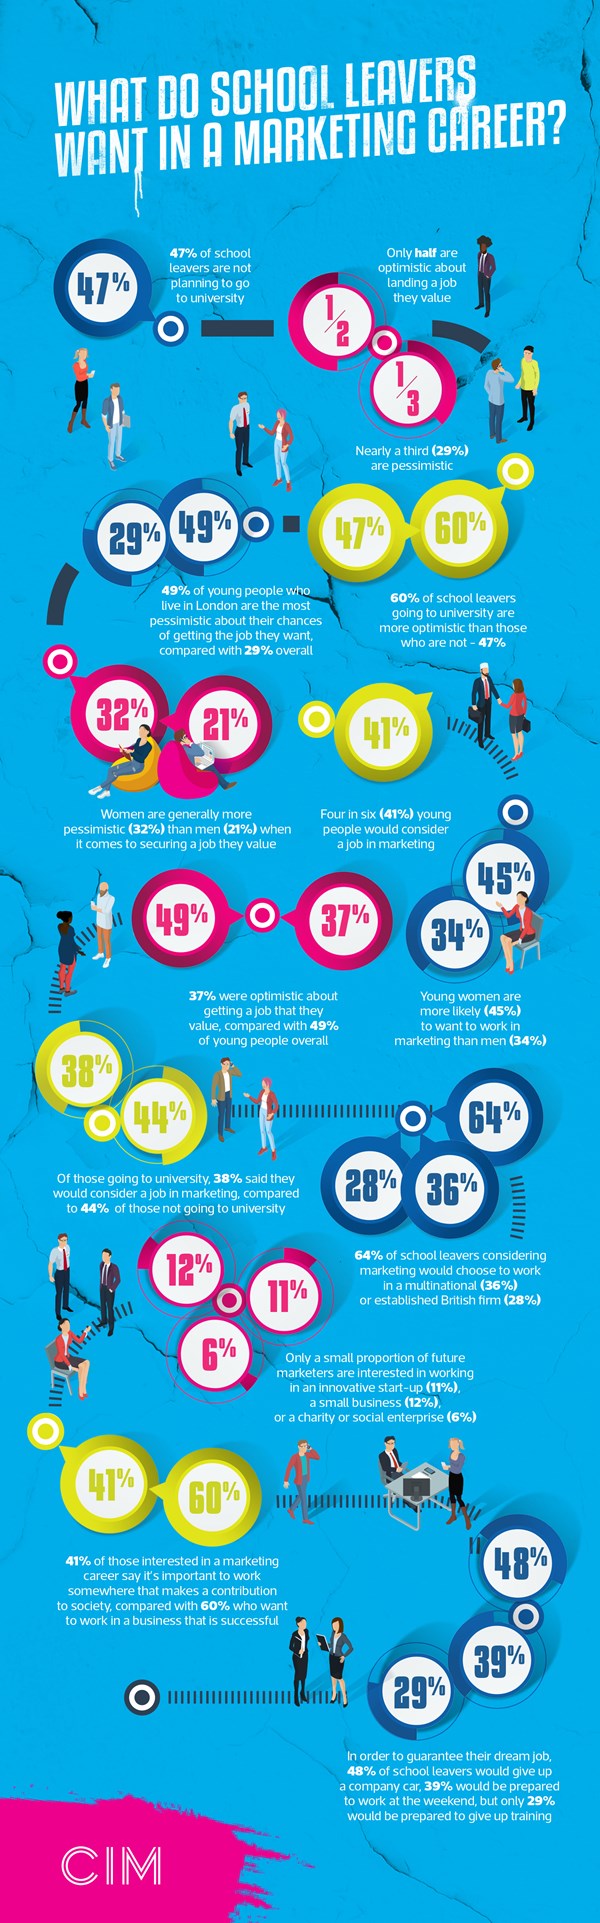 Next generation of marketers want job security infographic CIM